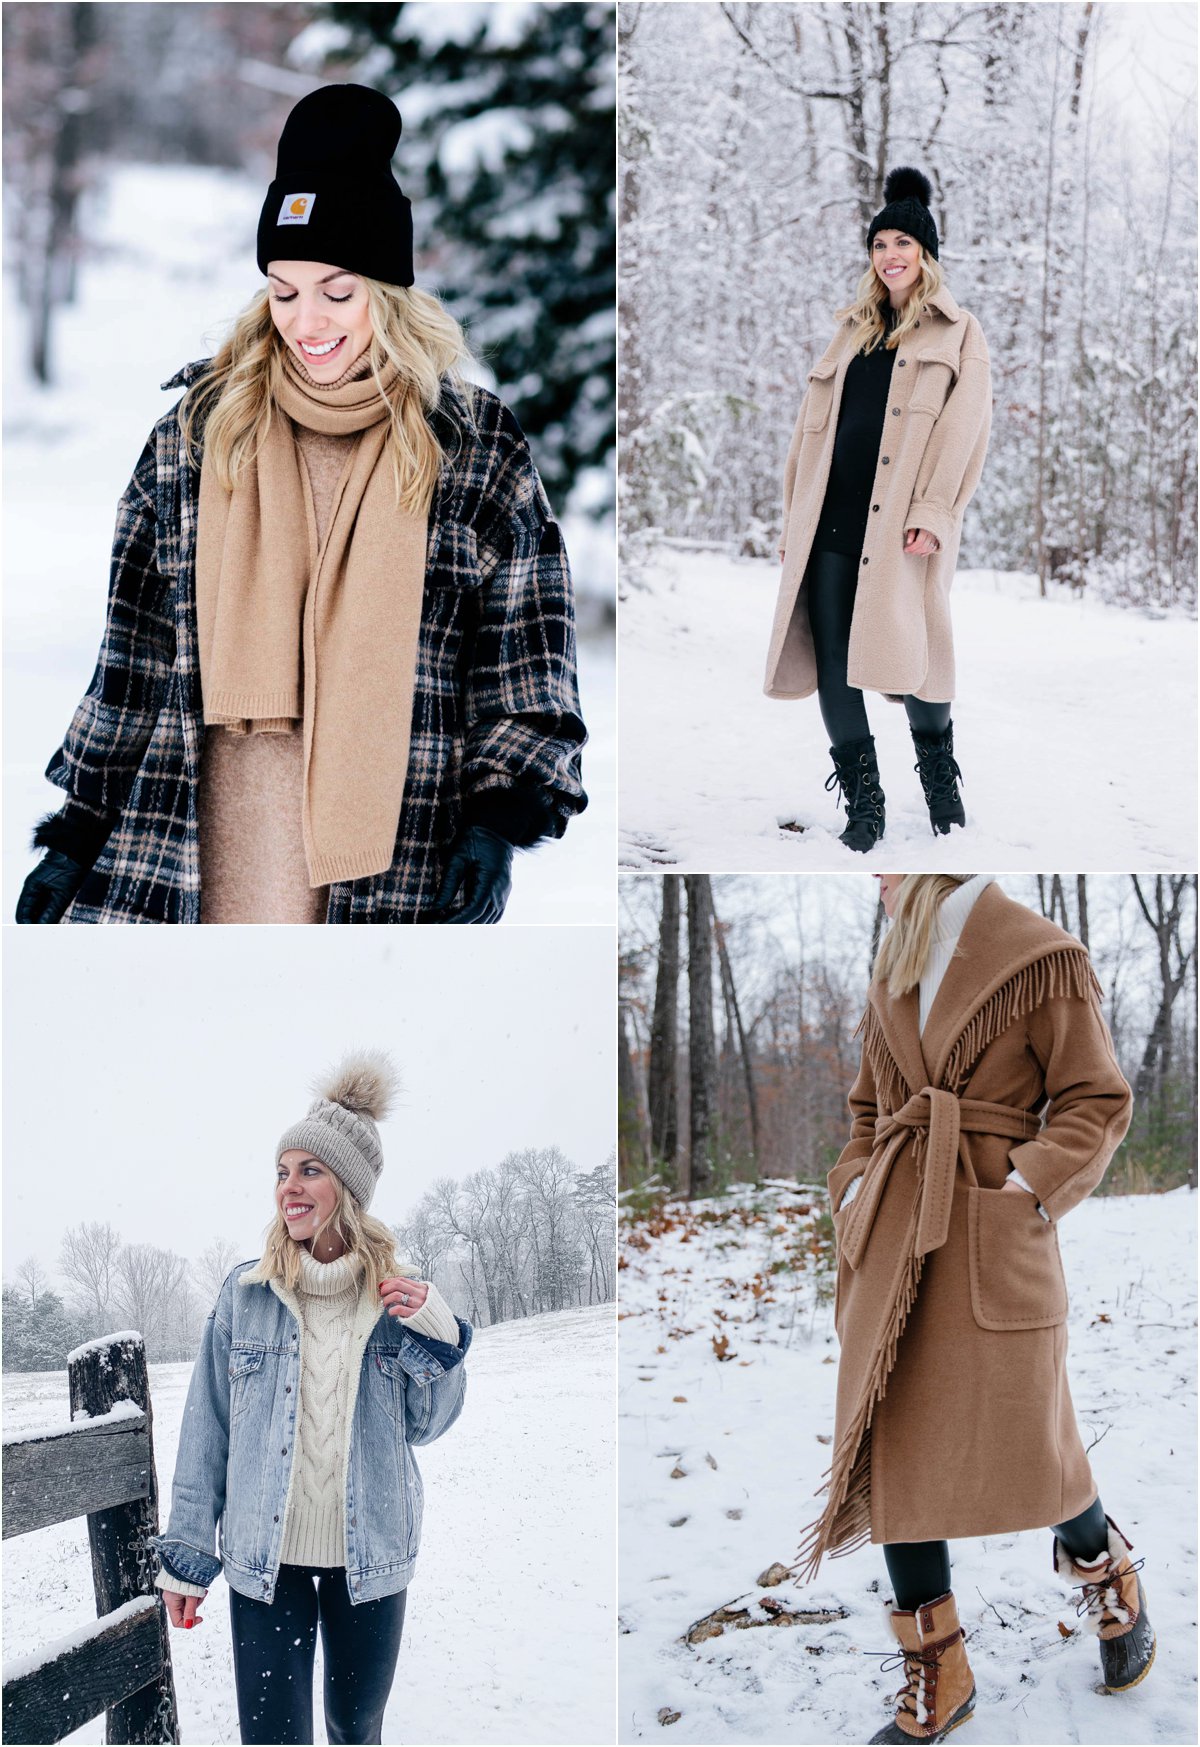 9 Chic Ways to Wear an Oversized Scarf this Winter - Meagan's Moda